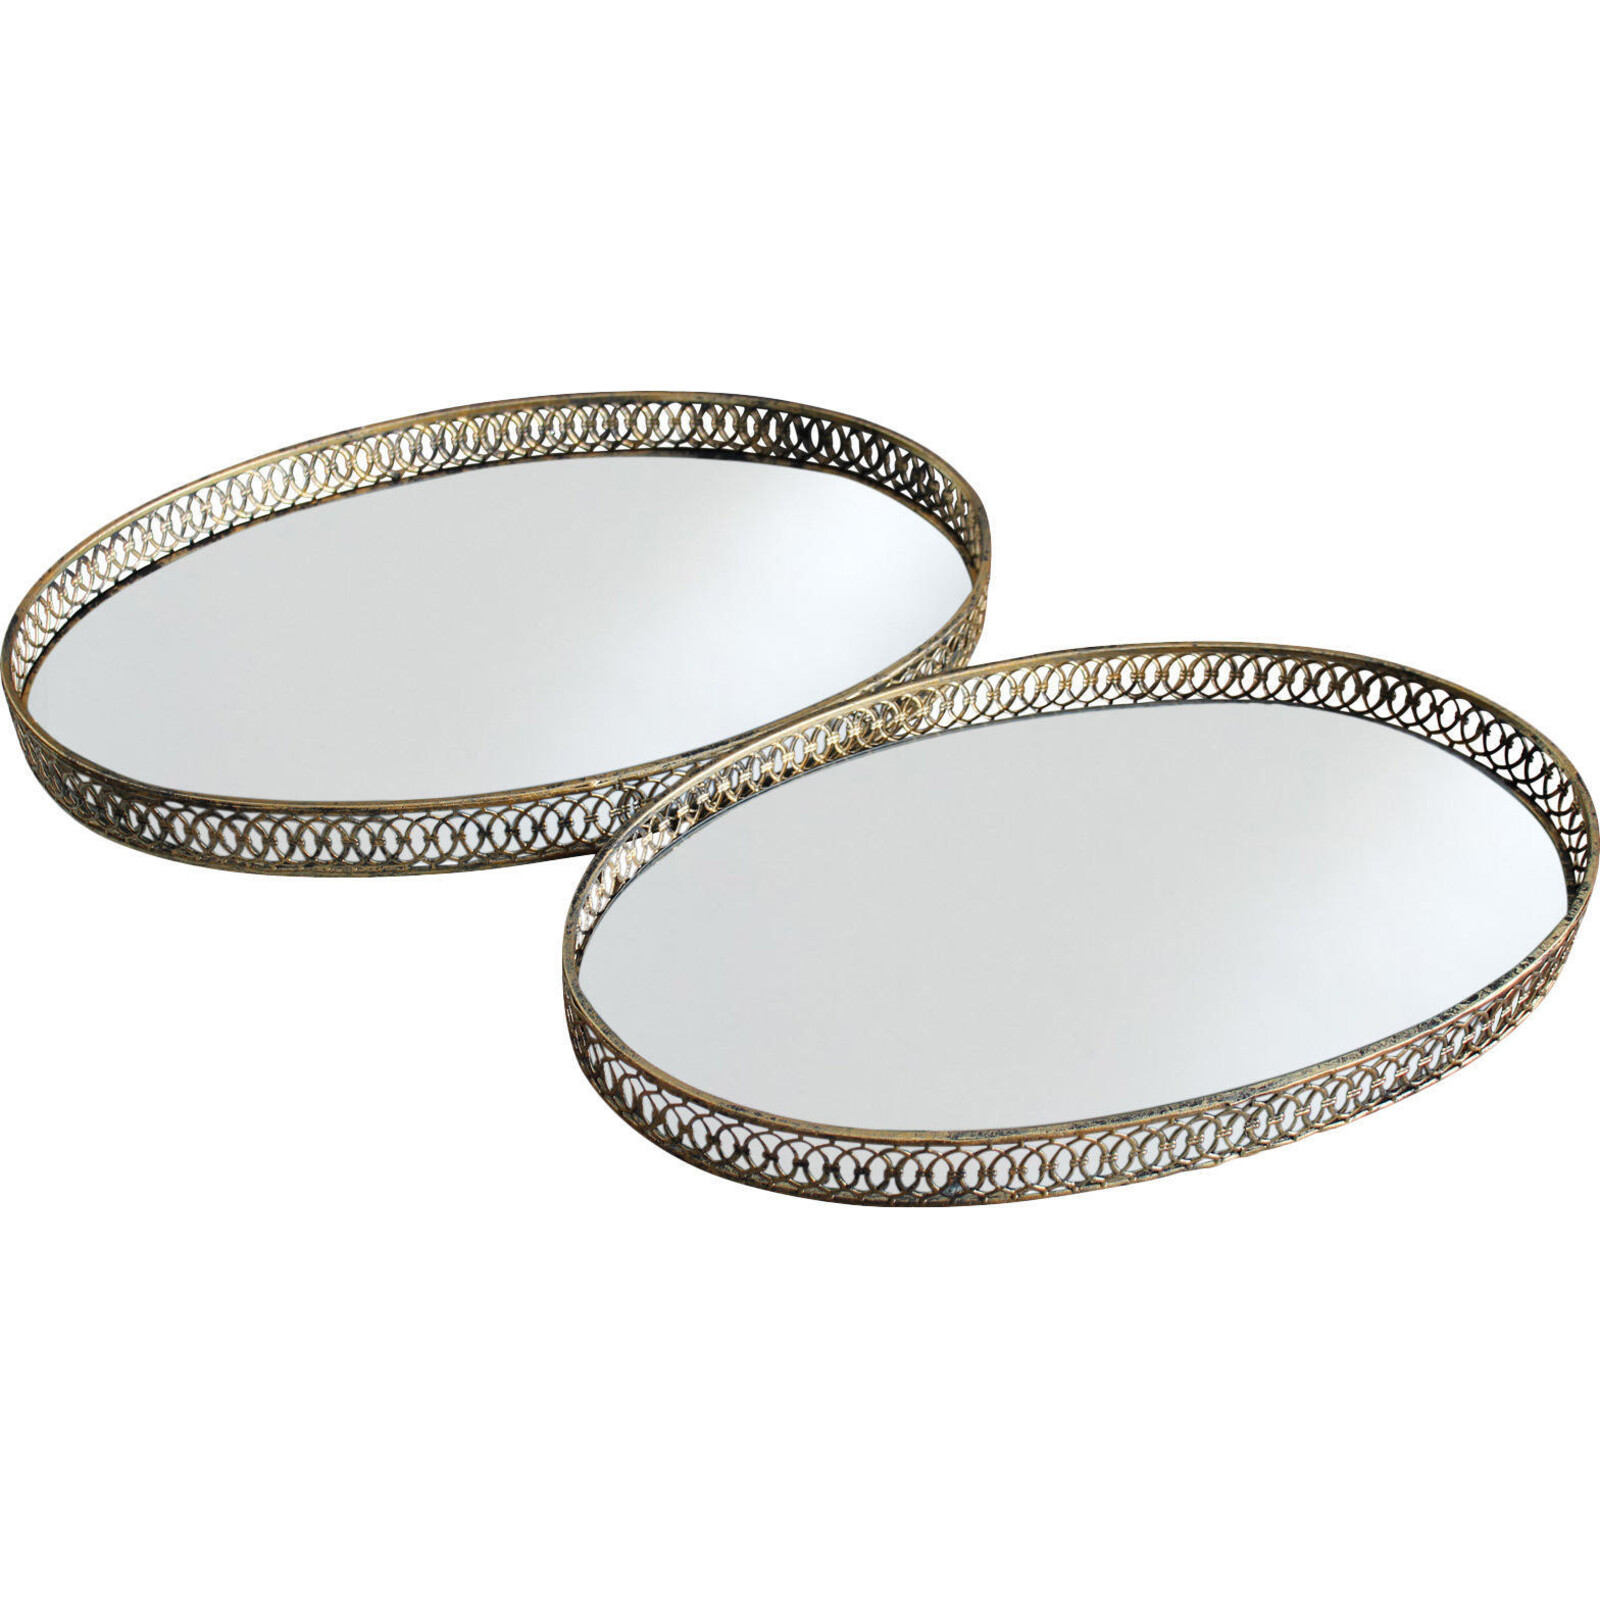 Mirrored Trays Gold S/2